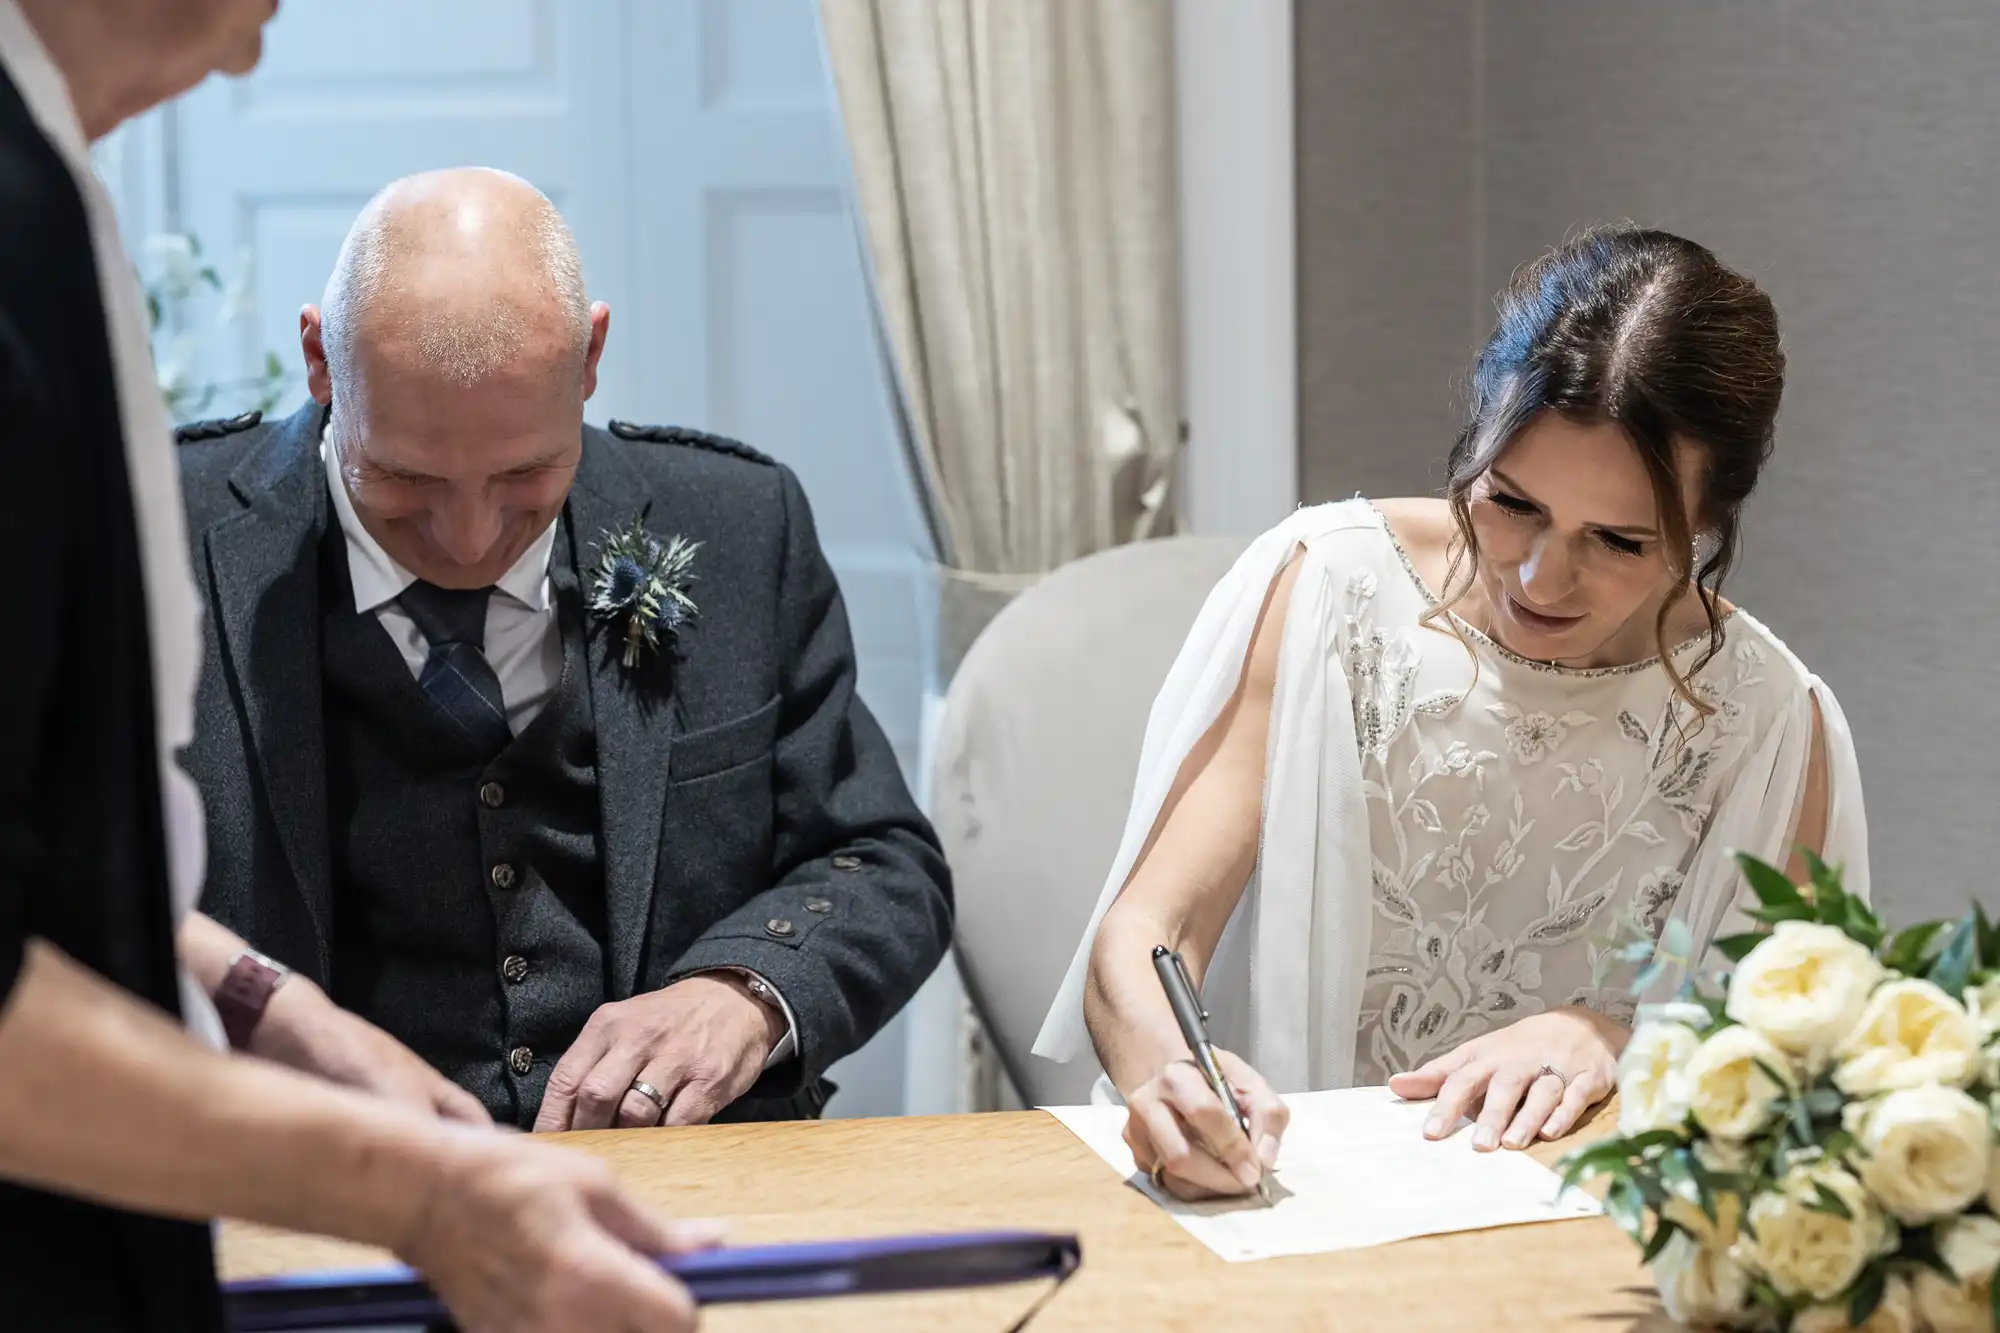 A bride signs a document at a wooden table while a bald man in formal attire sits beside her, smiling. Another person stands in the foreground. A bouquet of white roses sits on the table.